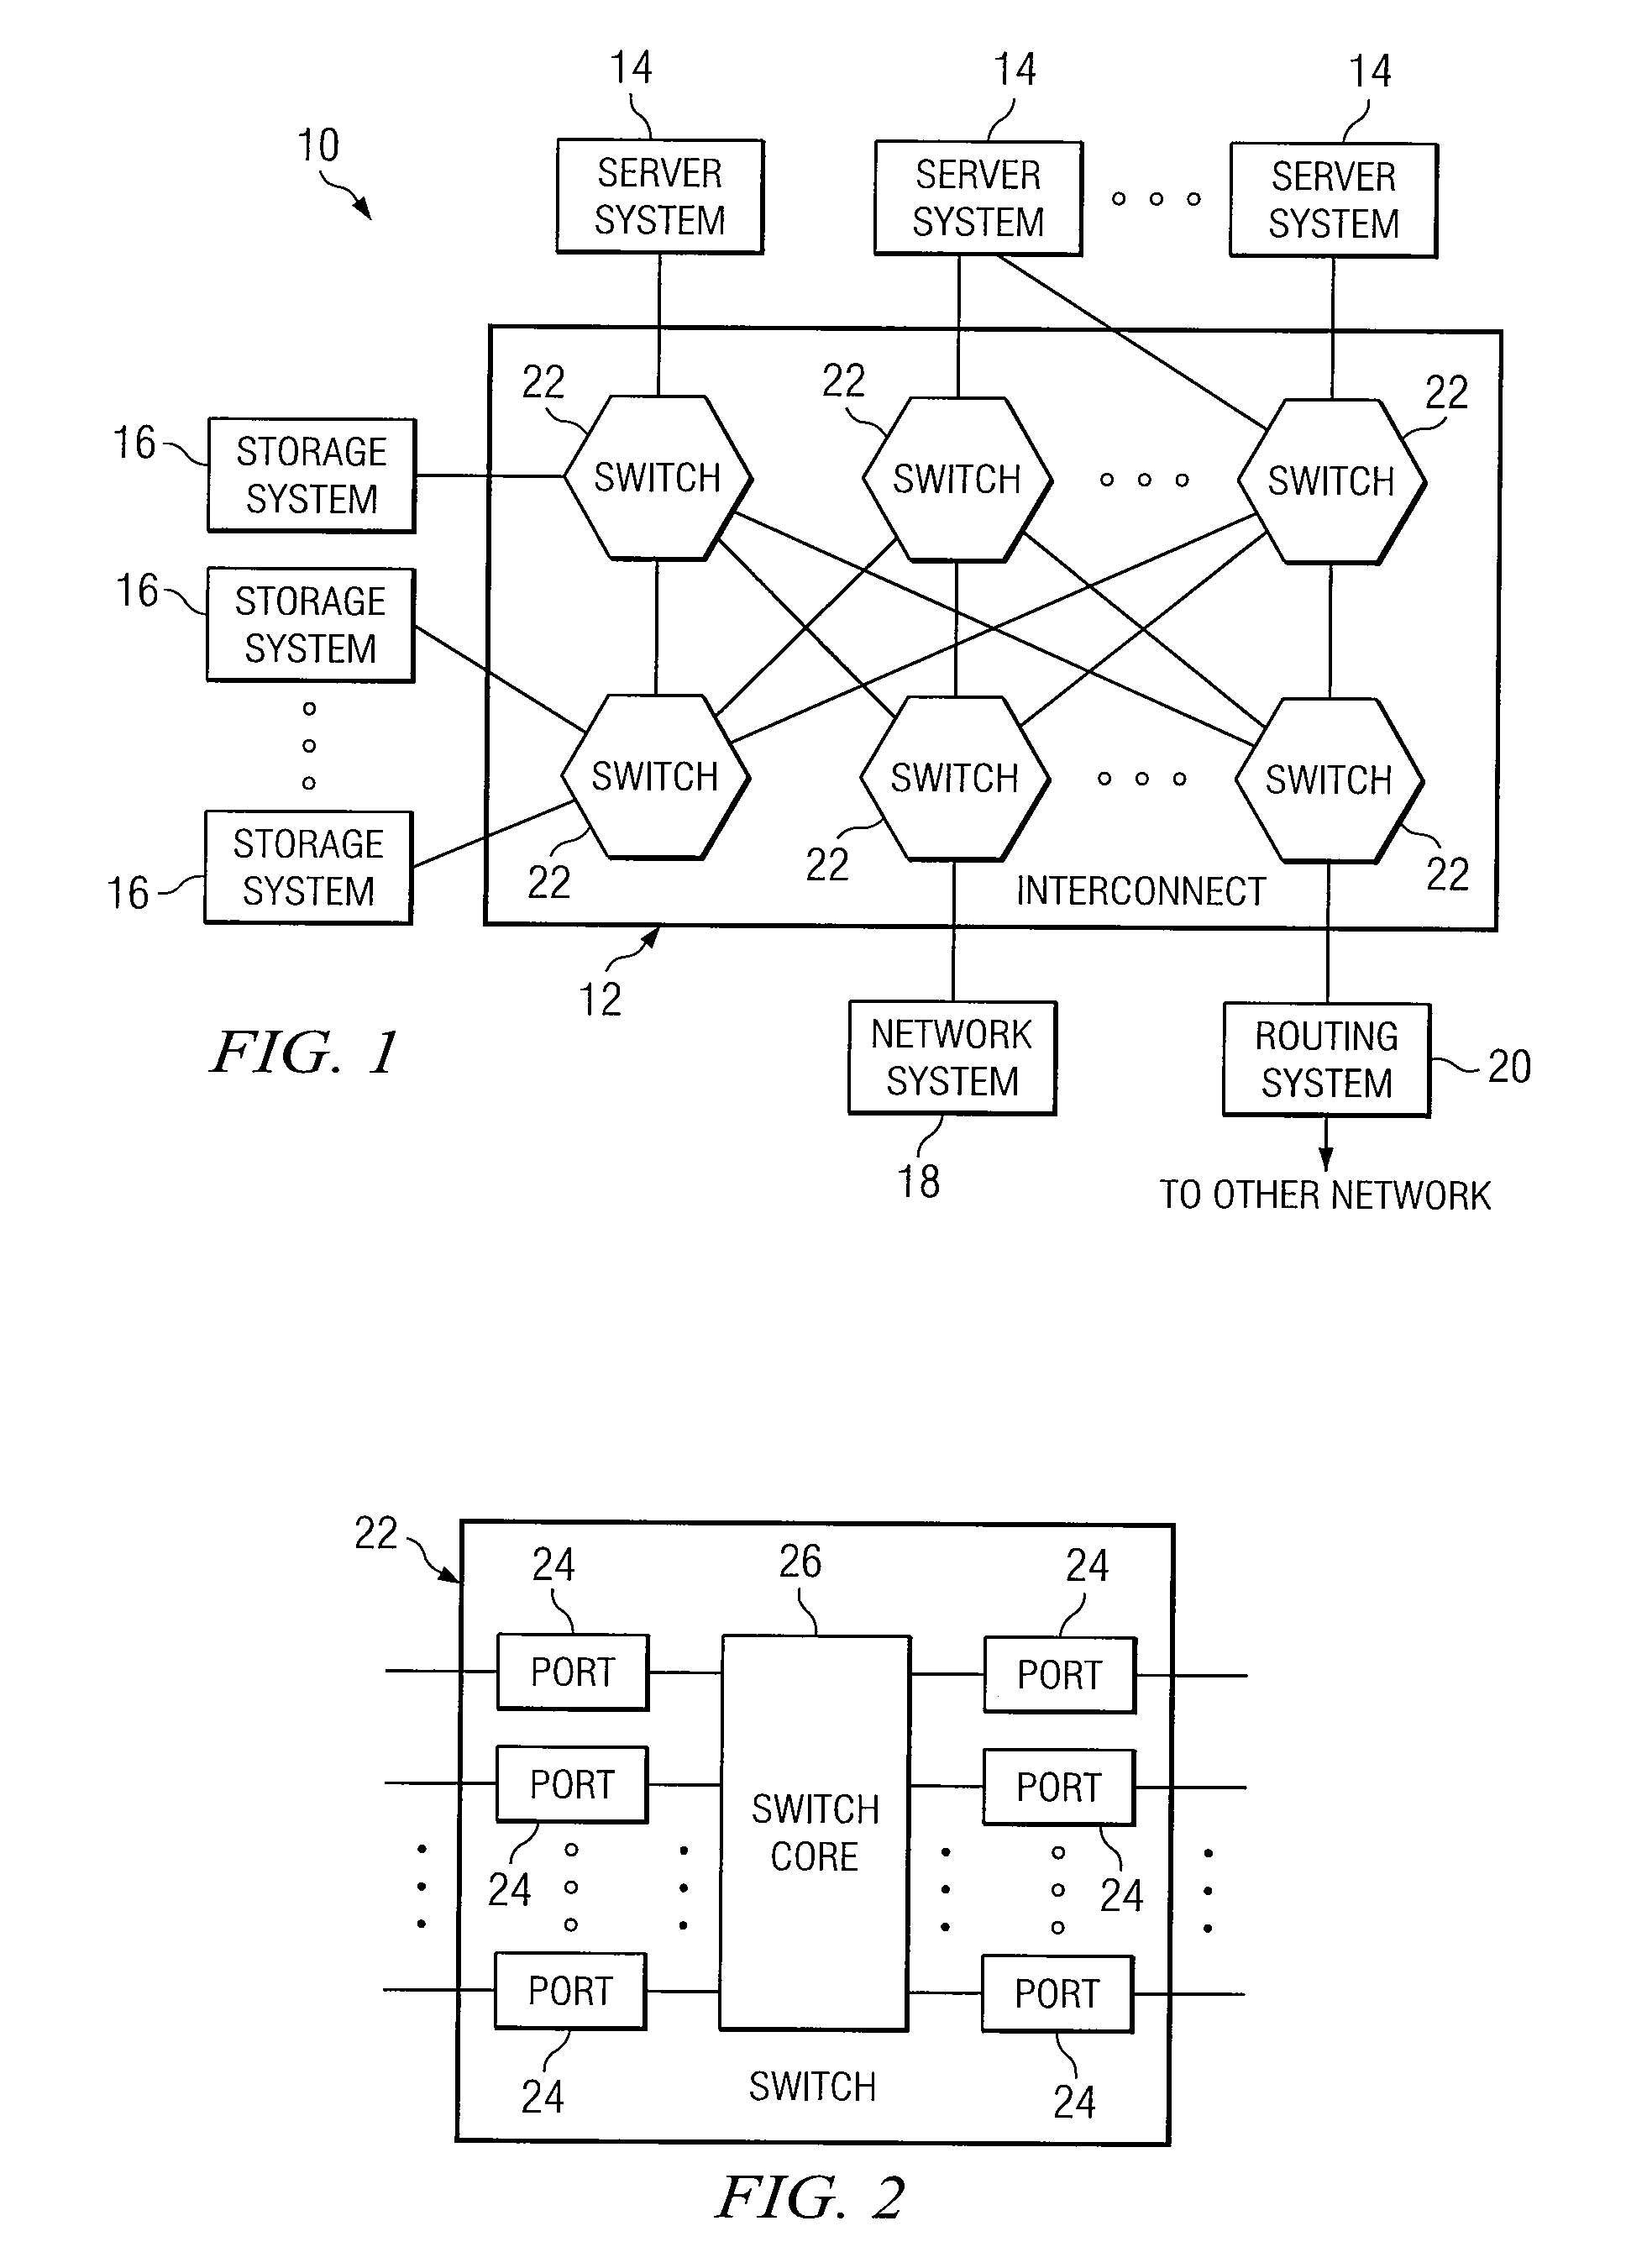 System and Method for Allocating Memory Resources in a Switching Environment